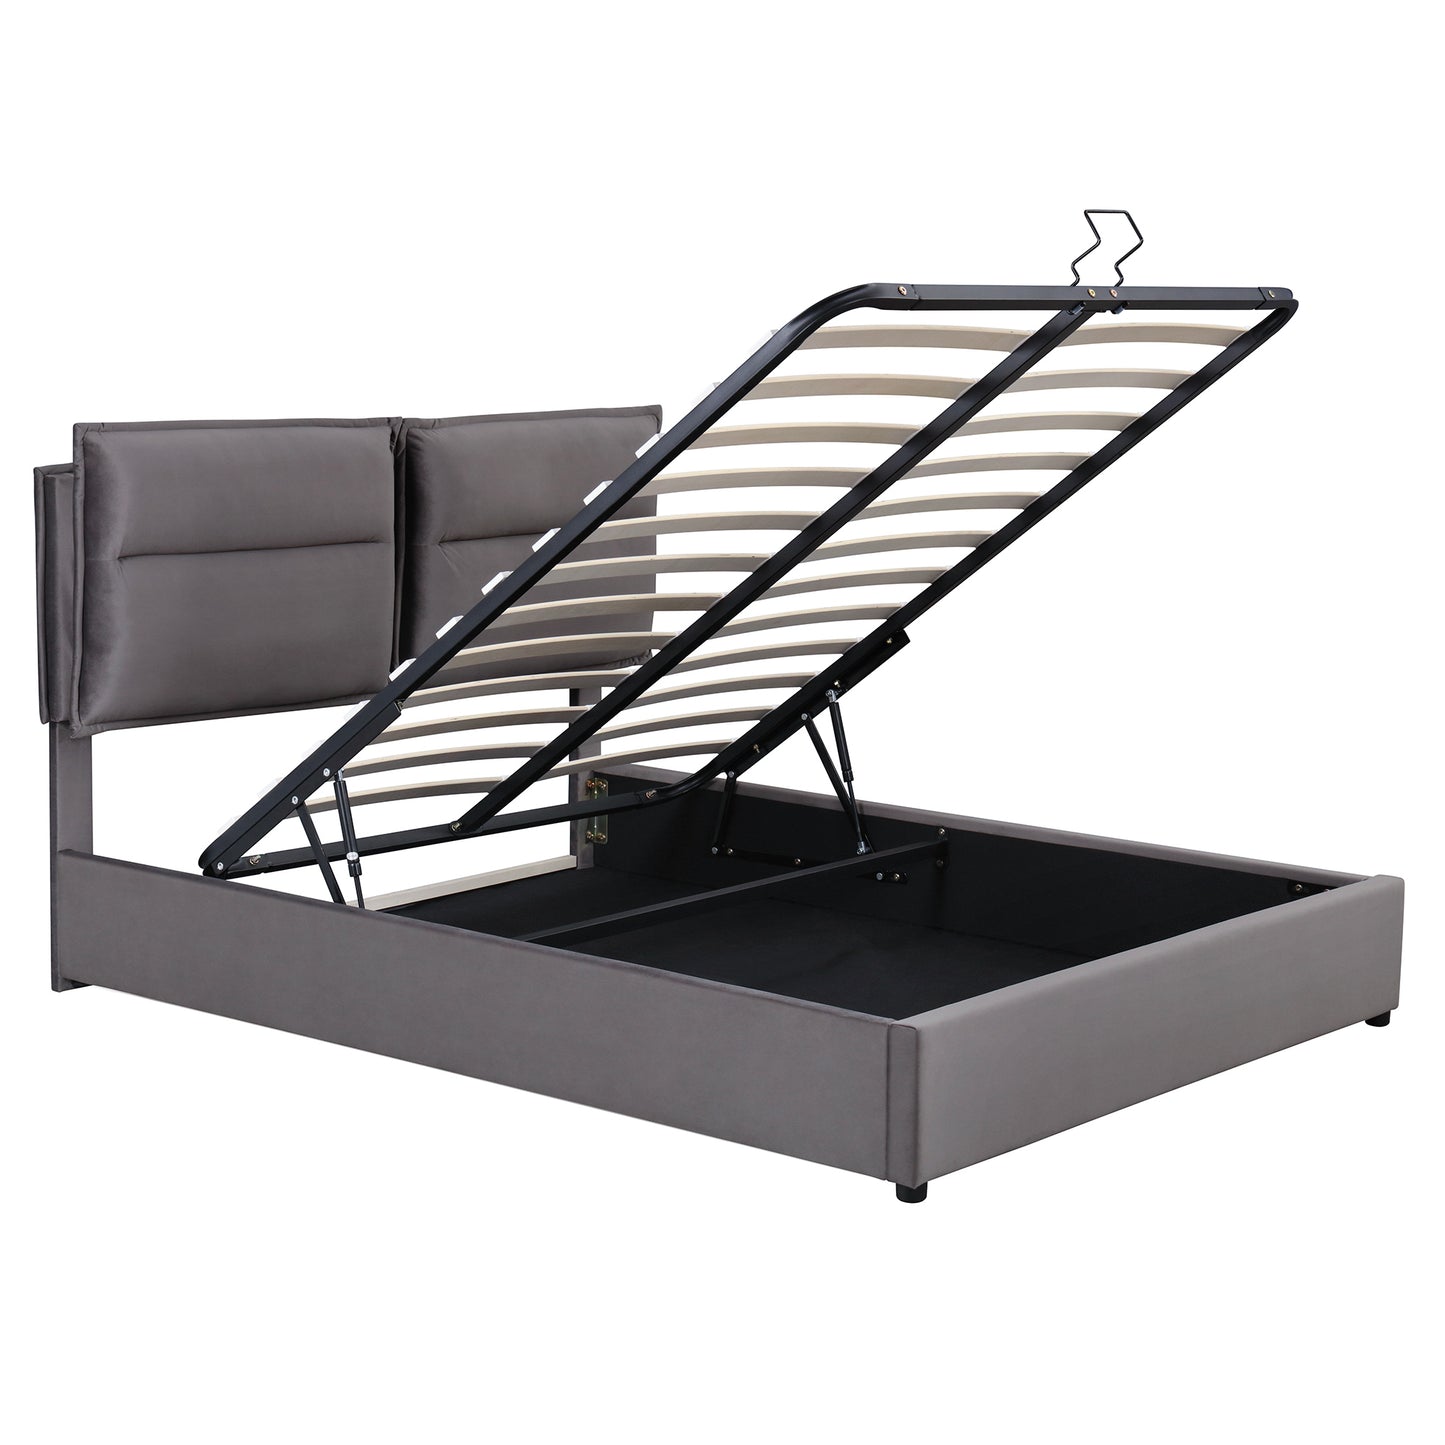 Upholstered Platform bed with a Hydraulic Storage System, Full size, Gray